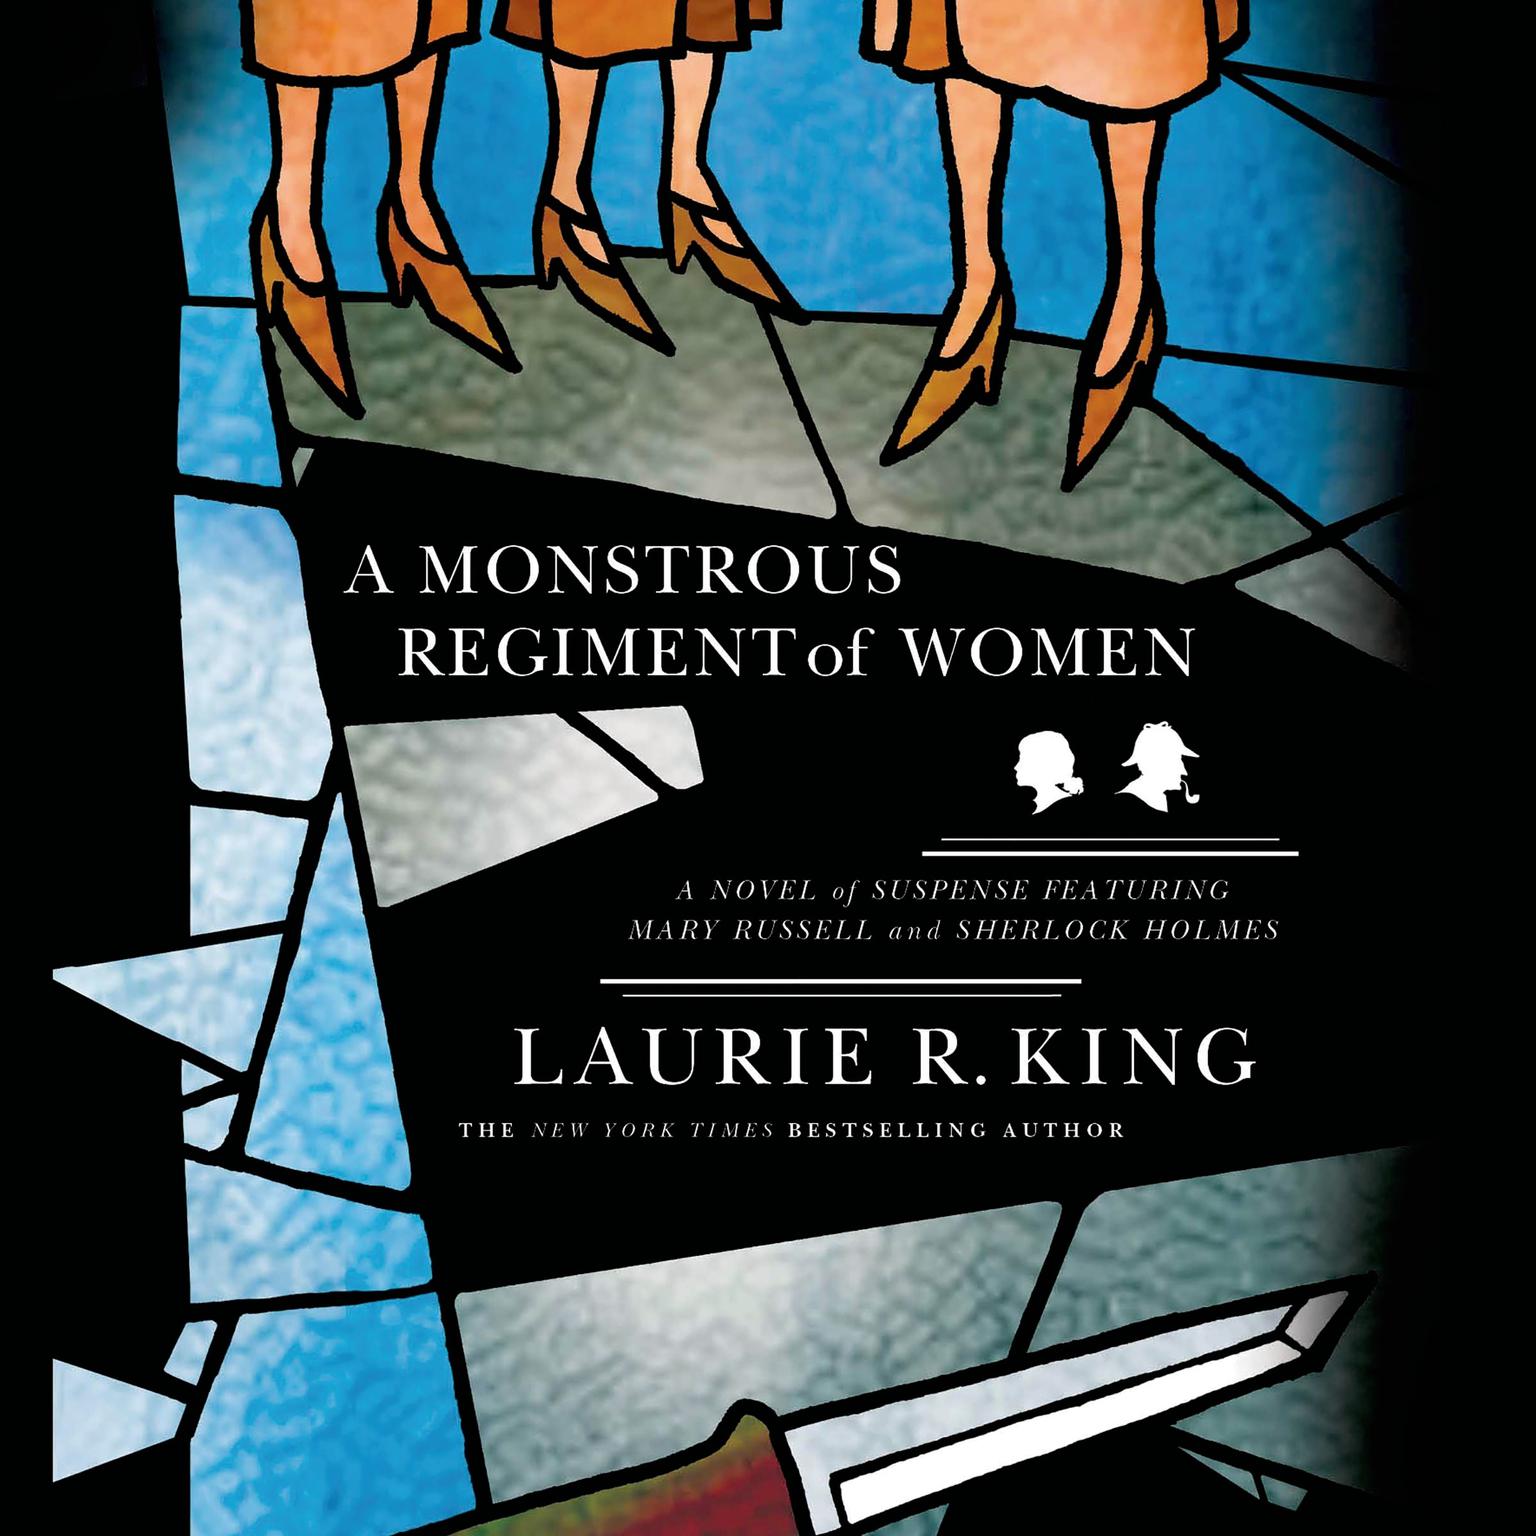 A Monstrous Regiment of Women: A Novel of Suspense Featuring Mary Russell and Sherlock Holmes Audiobook, by Laurie R. King